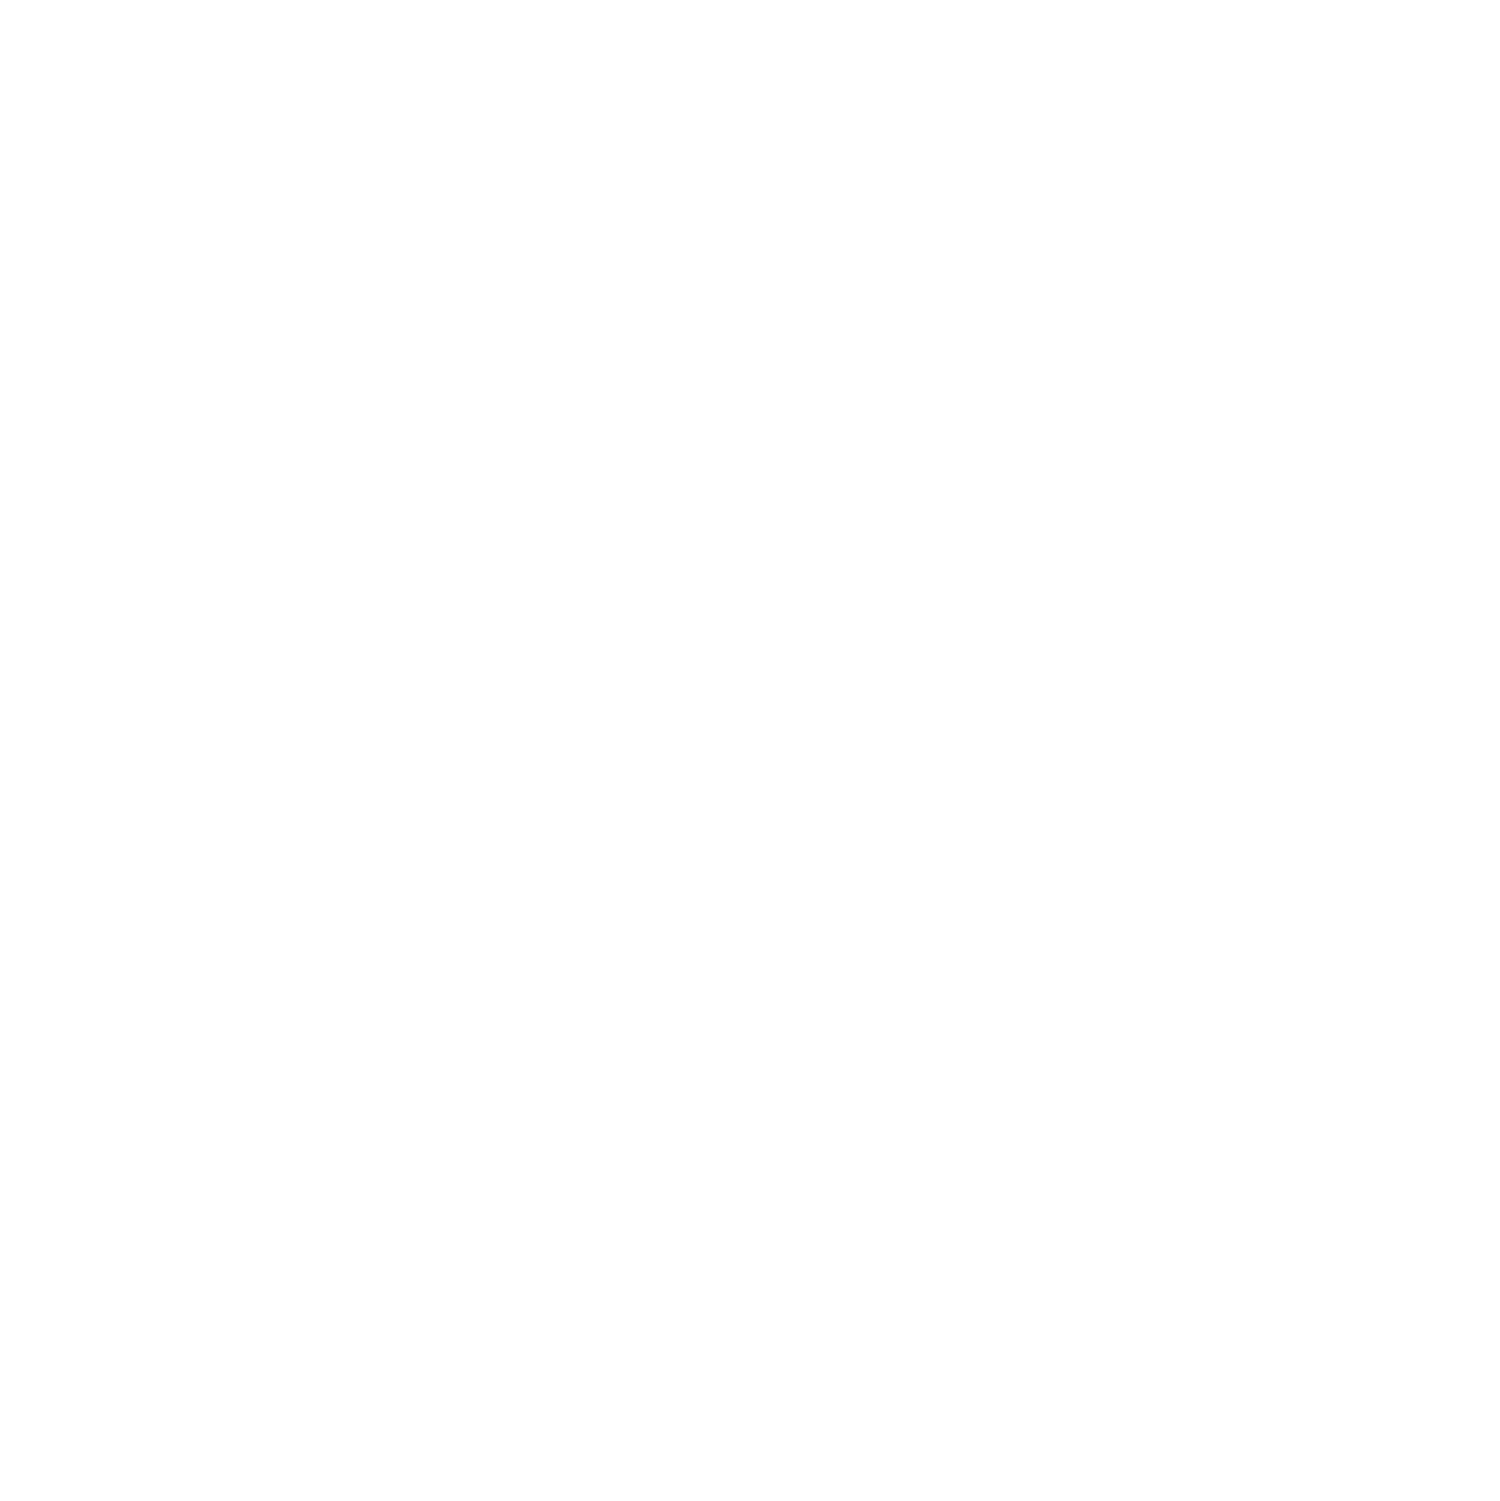 Pegalo Pictures